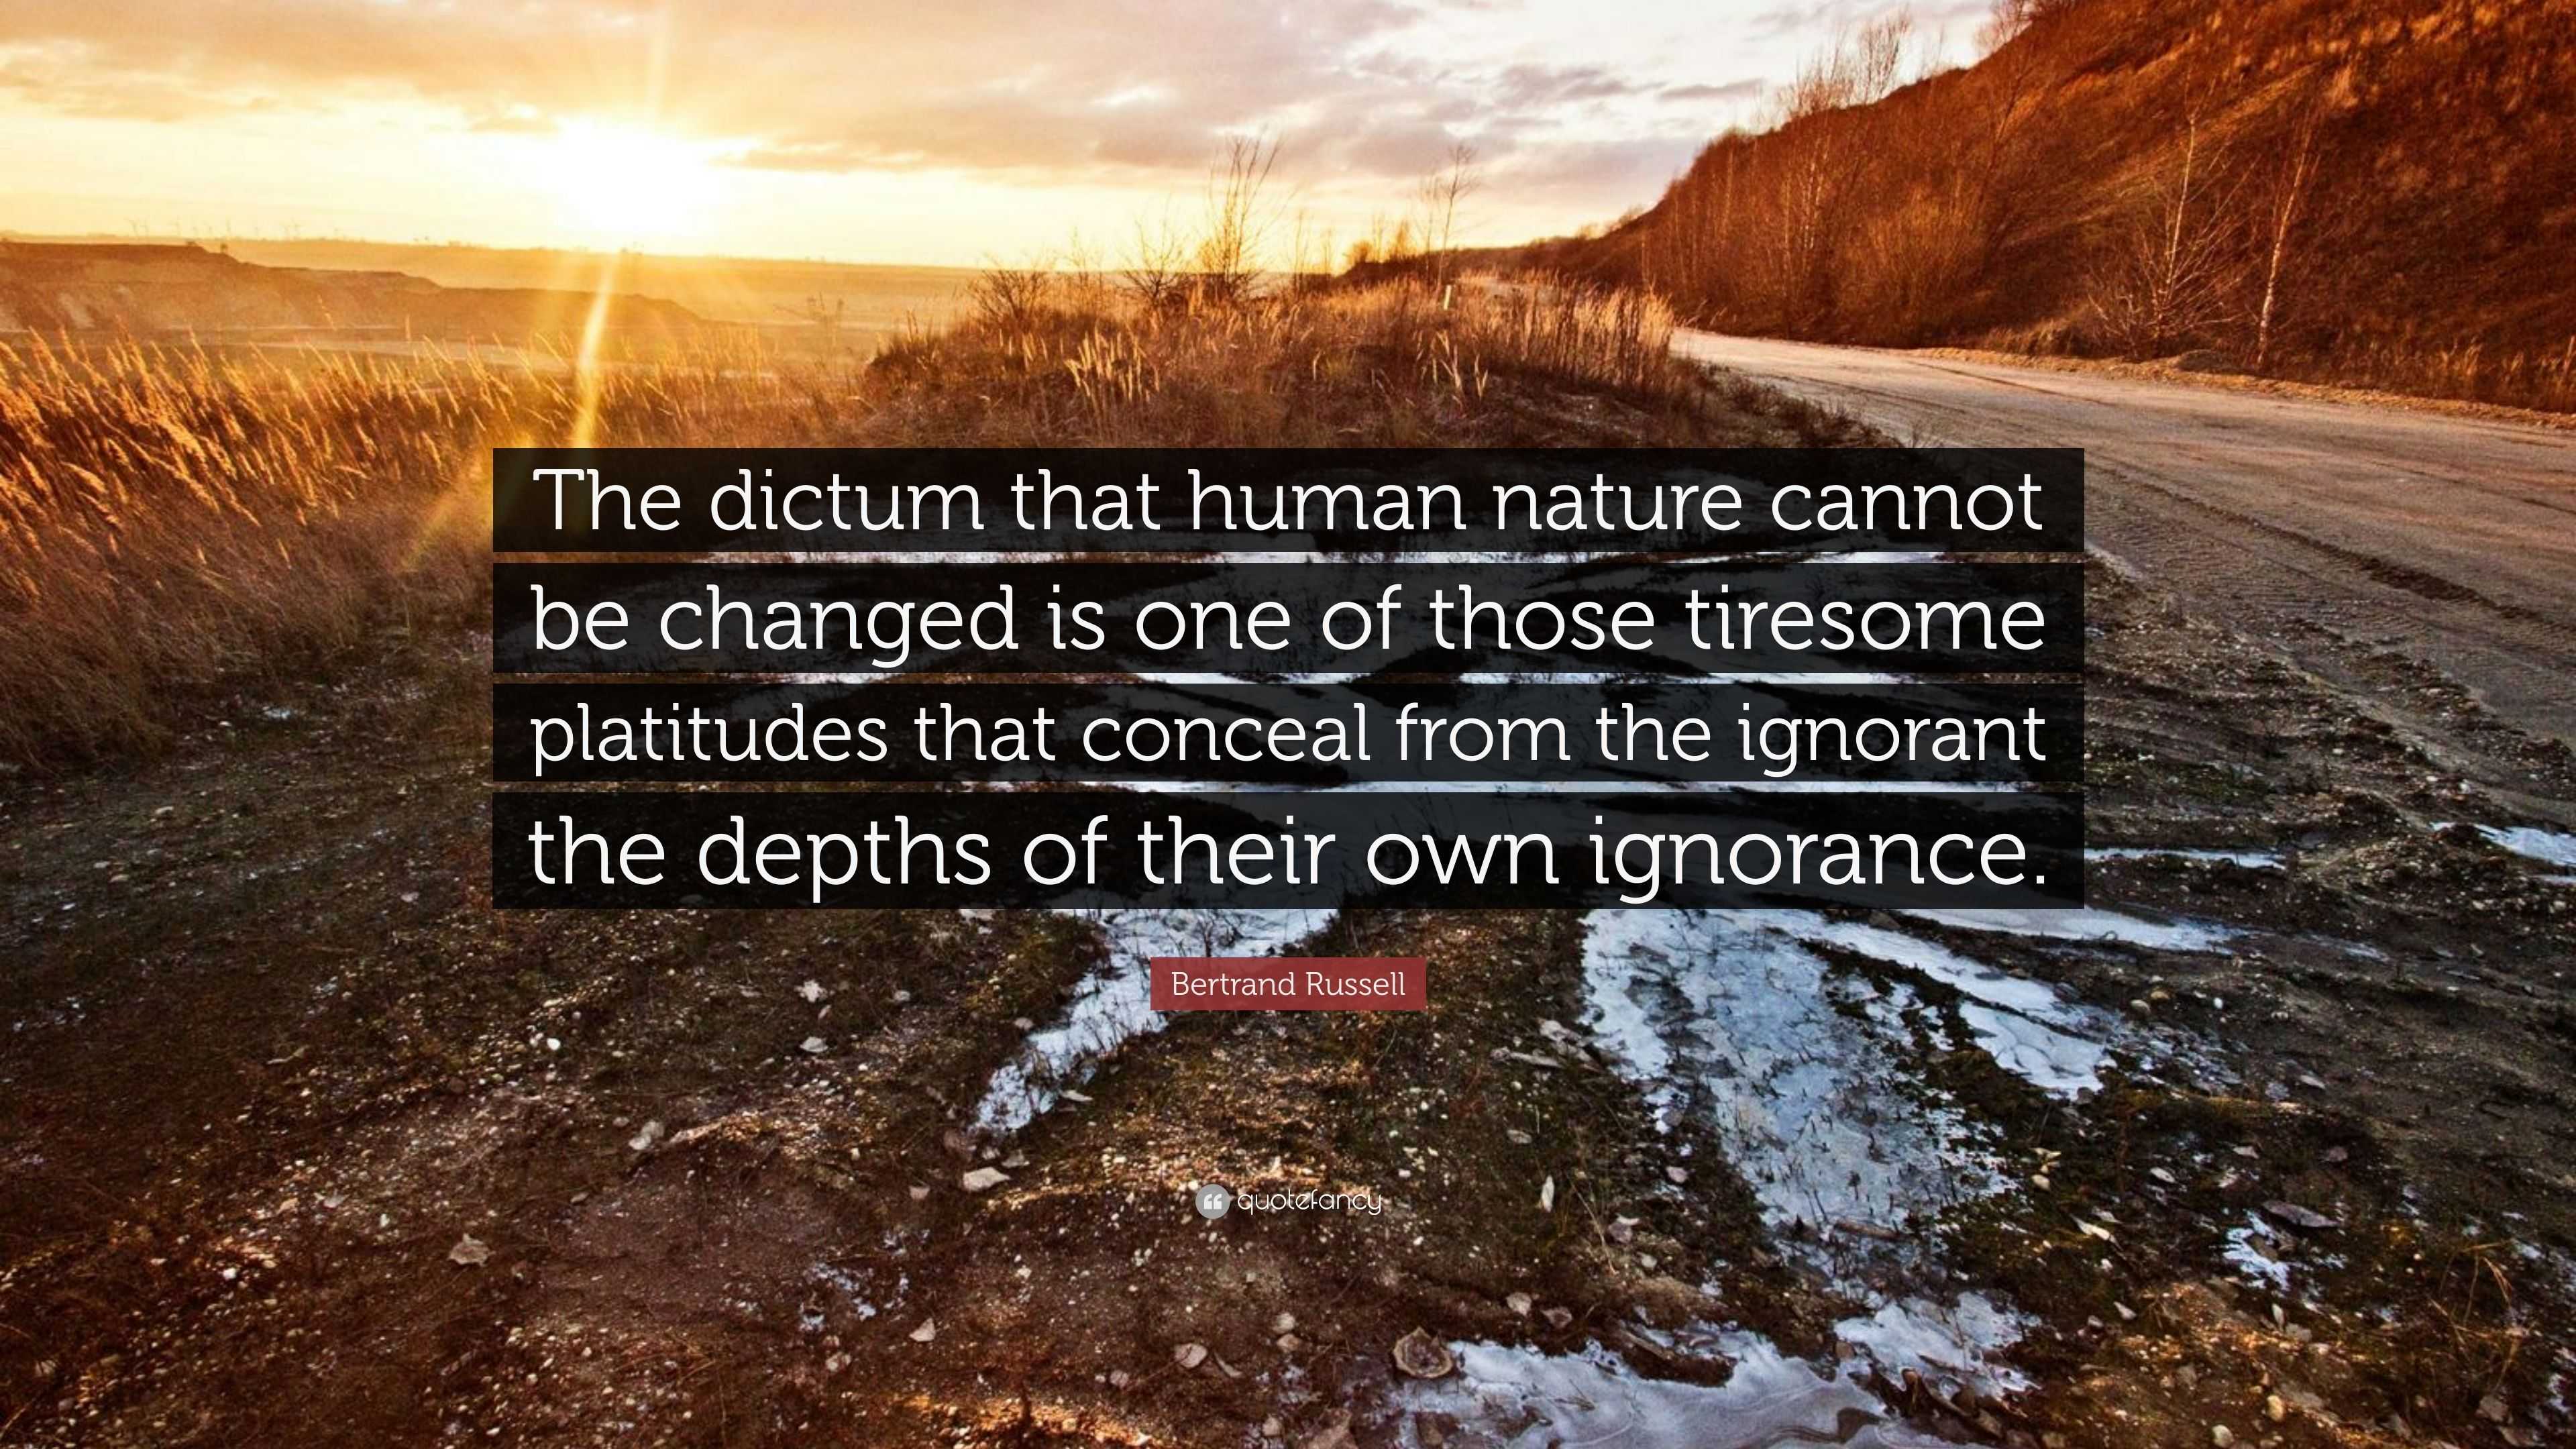 Bertrand Russell Quote: “The dictum that human nature be changed one of those tiresome platitudes that conceal from the ignorant the de...”